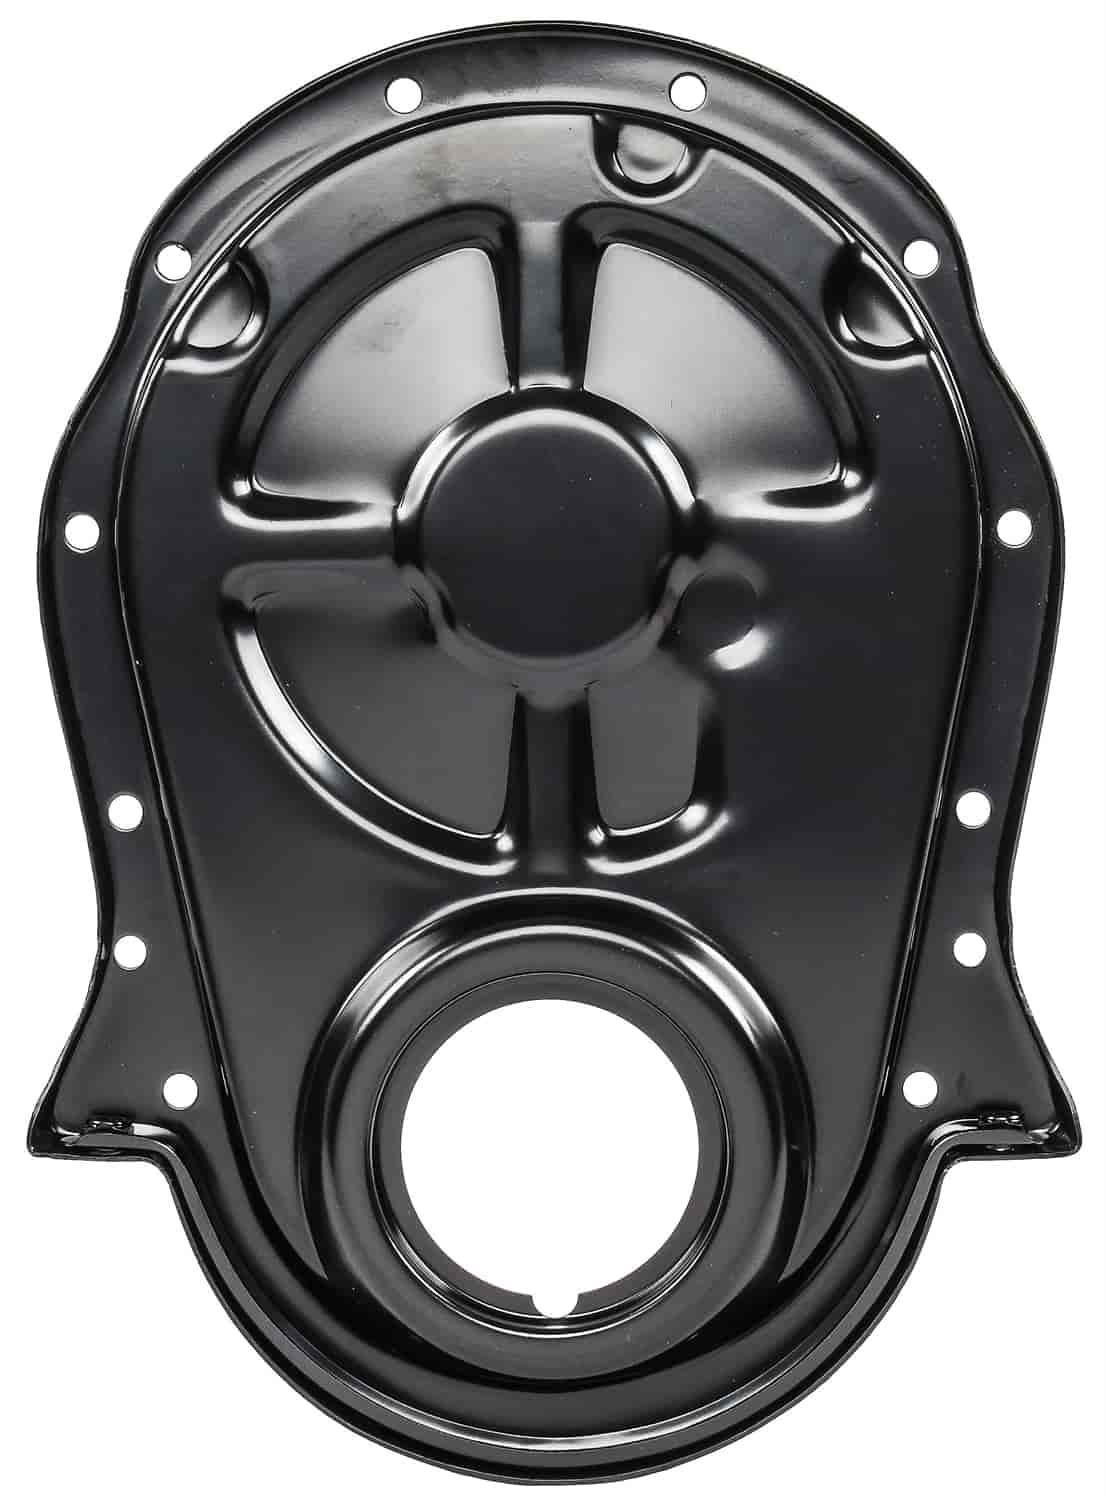 Timing Cover for 1966-1990 Big Block Chevy Mark IV 396, 402, 427, 454 [Black]